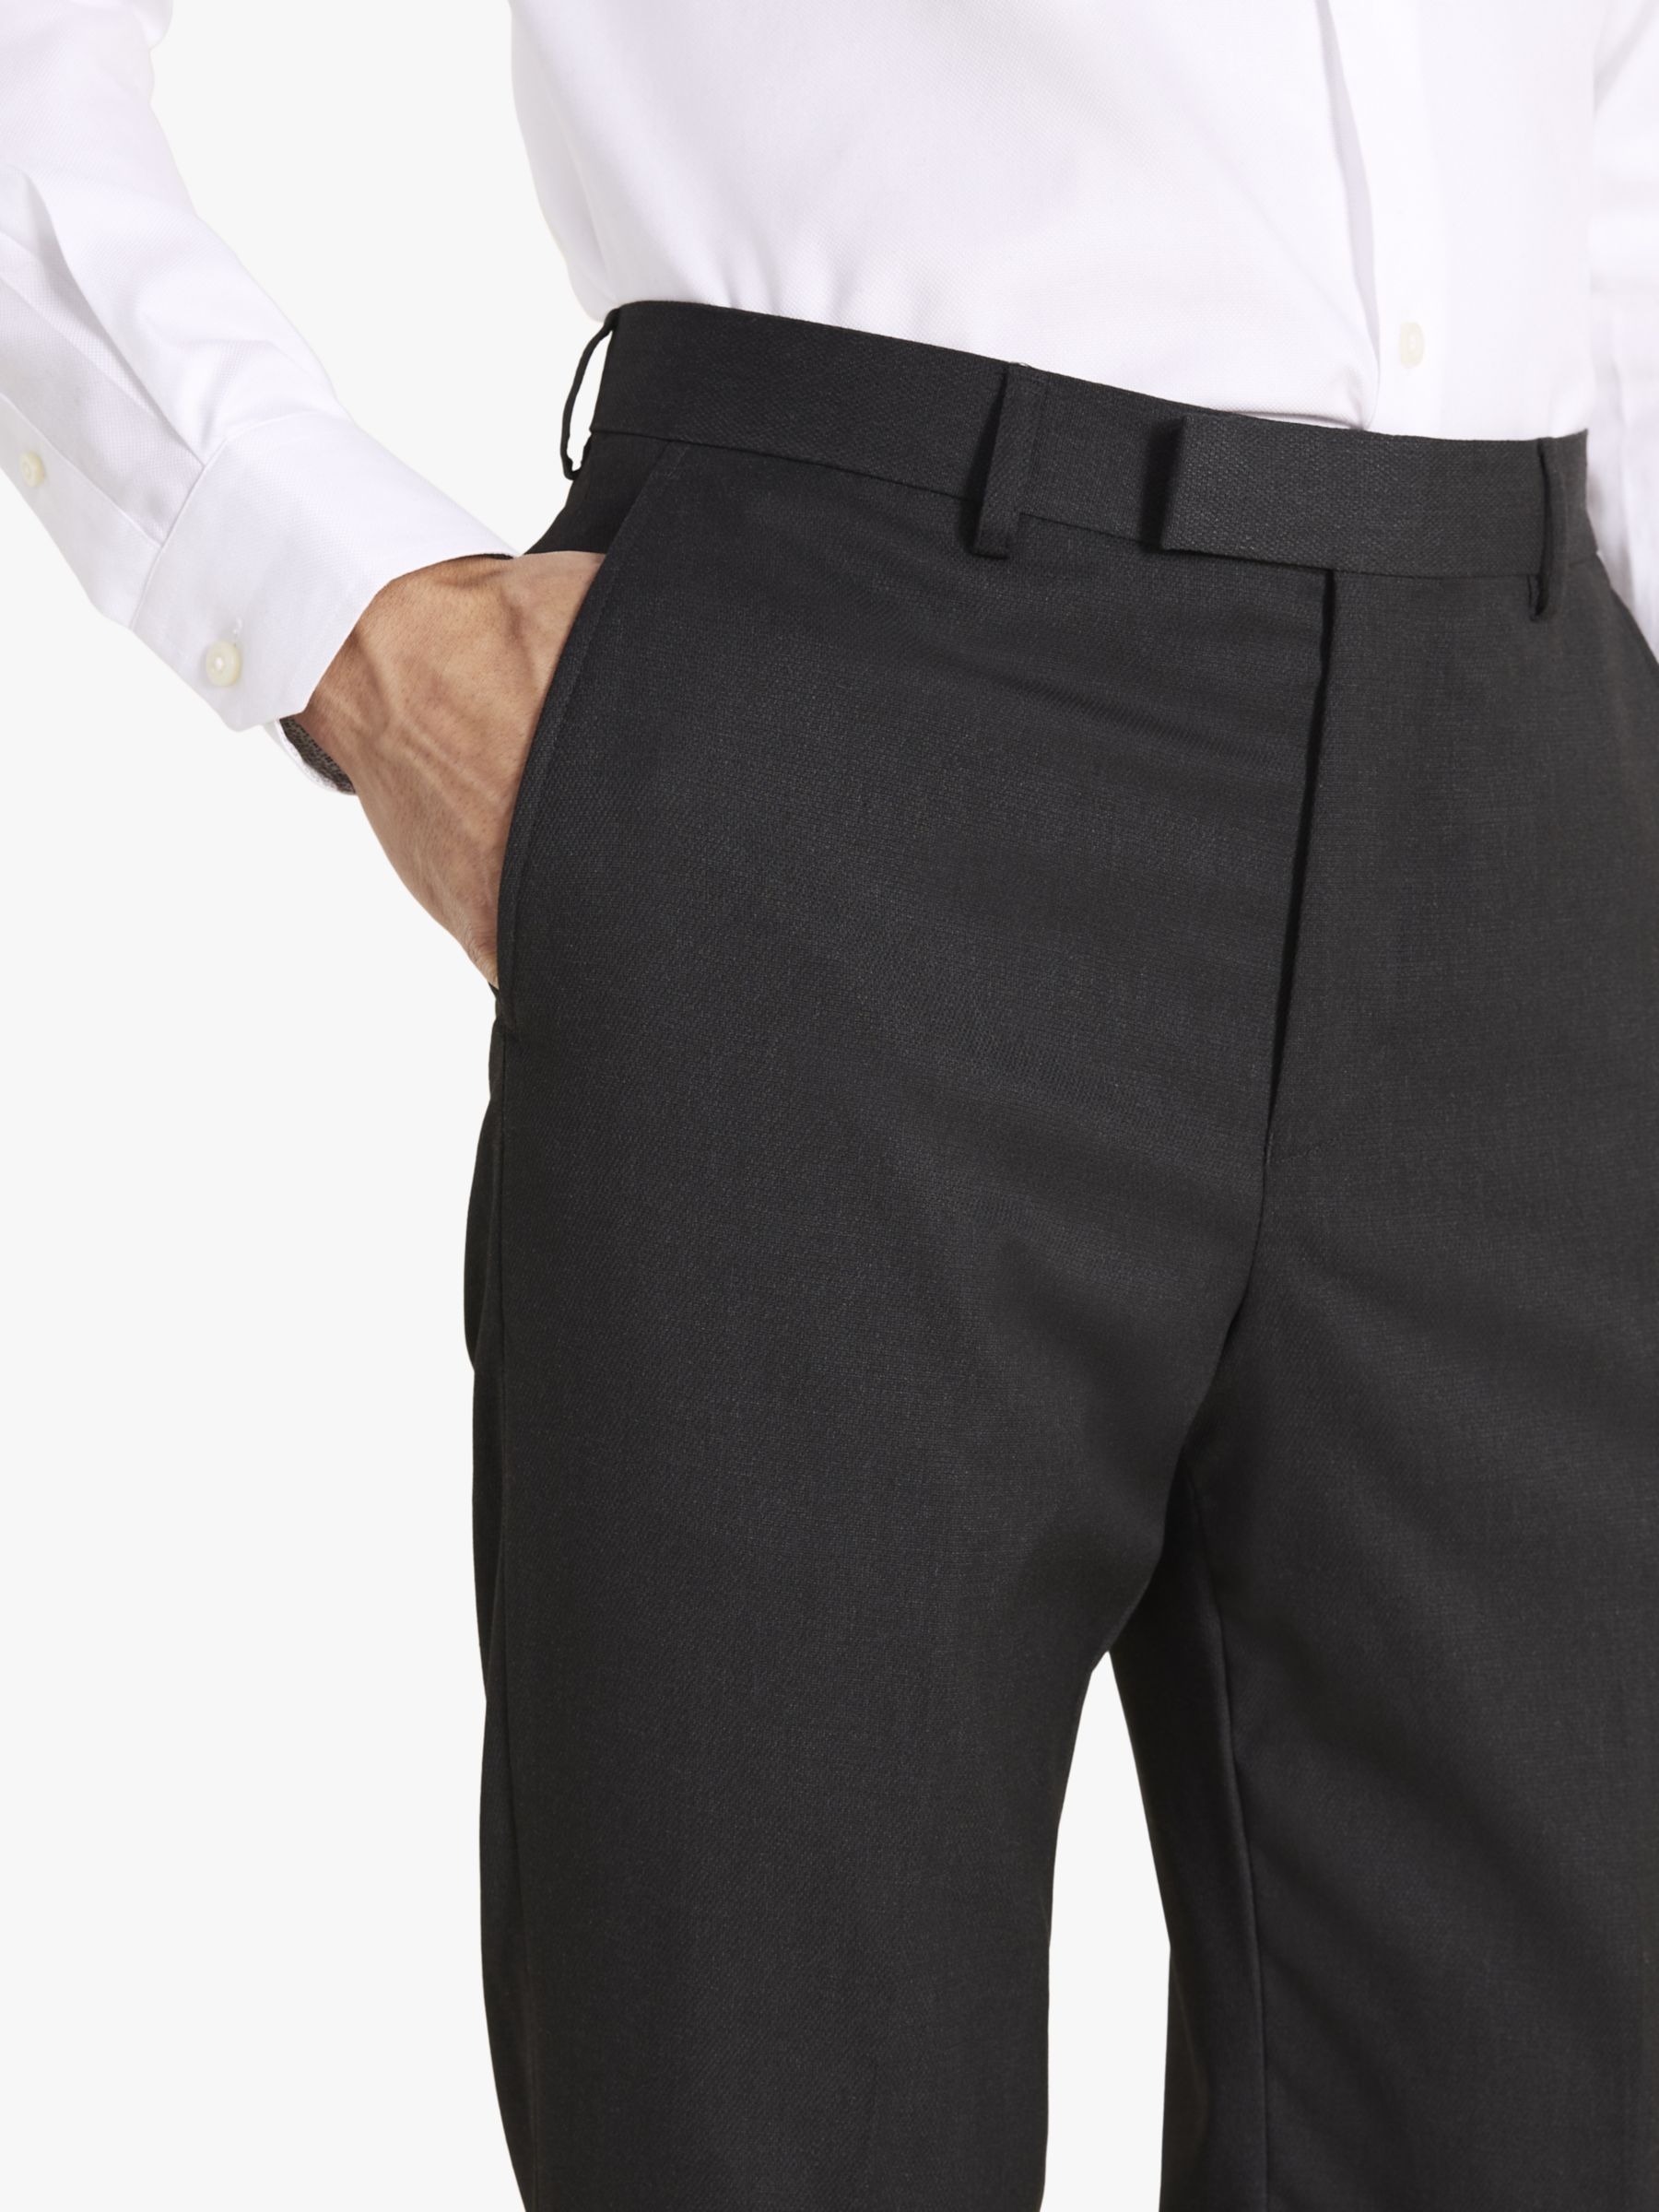 Moss 1851 Tailored Fit Stretch Trousers, Charcoal at John Lewis & Partners